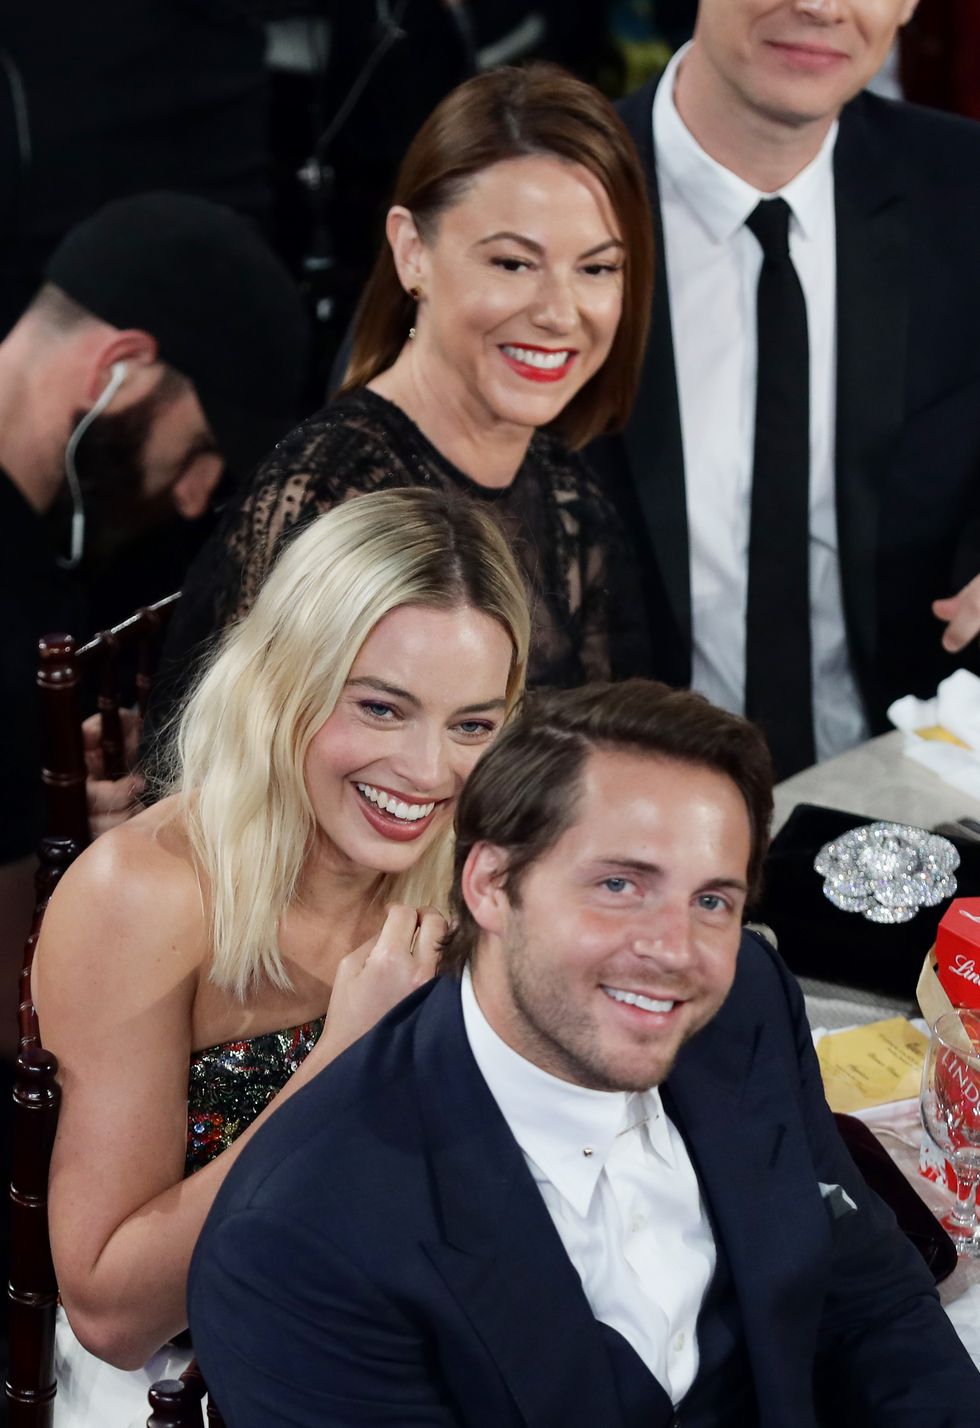 beverly hills, california january 05 77th annual golden globe awards pictured l r margot robbie and tom ackerley at the 77th annual golden globe awards held at the beverly hilton hotel on january 5, 2020 photo by neilson barnardnbcnbcu photo bank